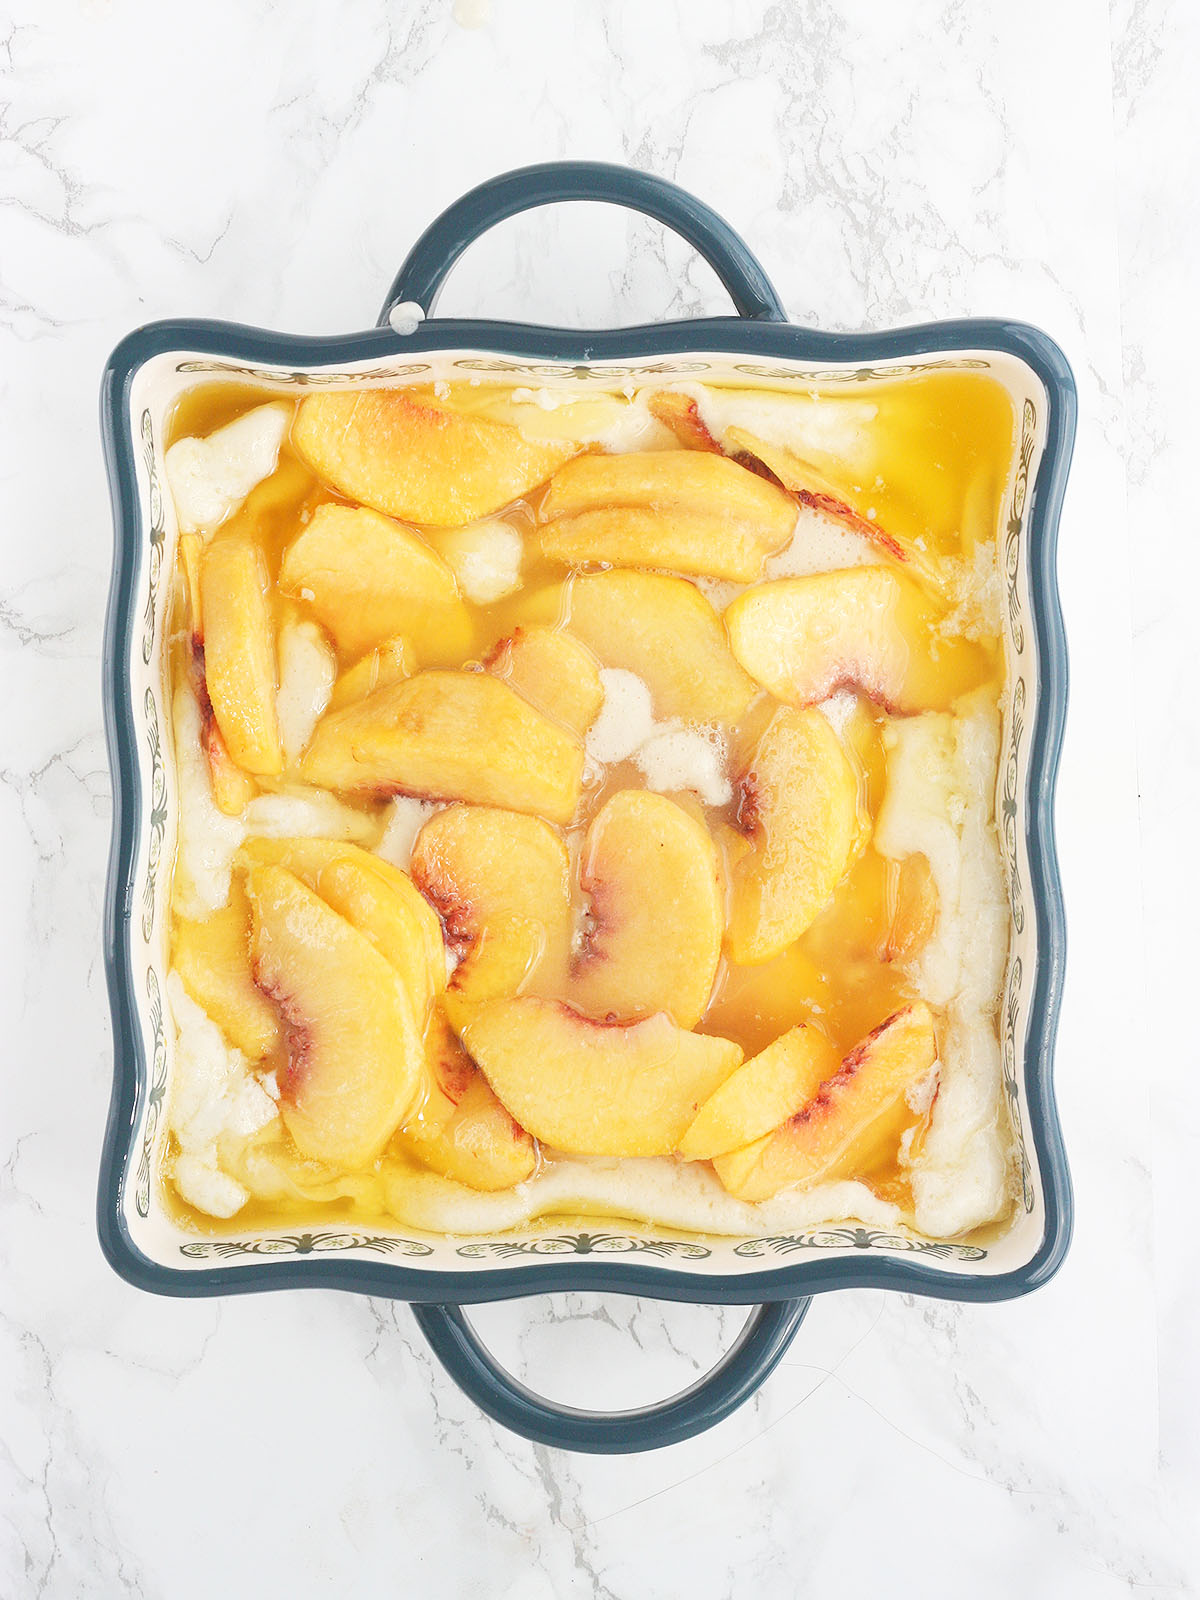 peach cobbler in a baking dish before going into the oven